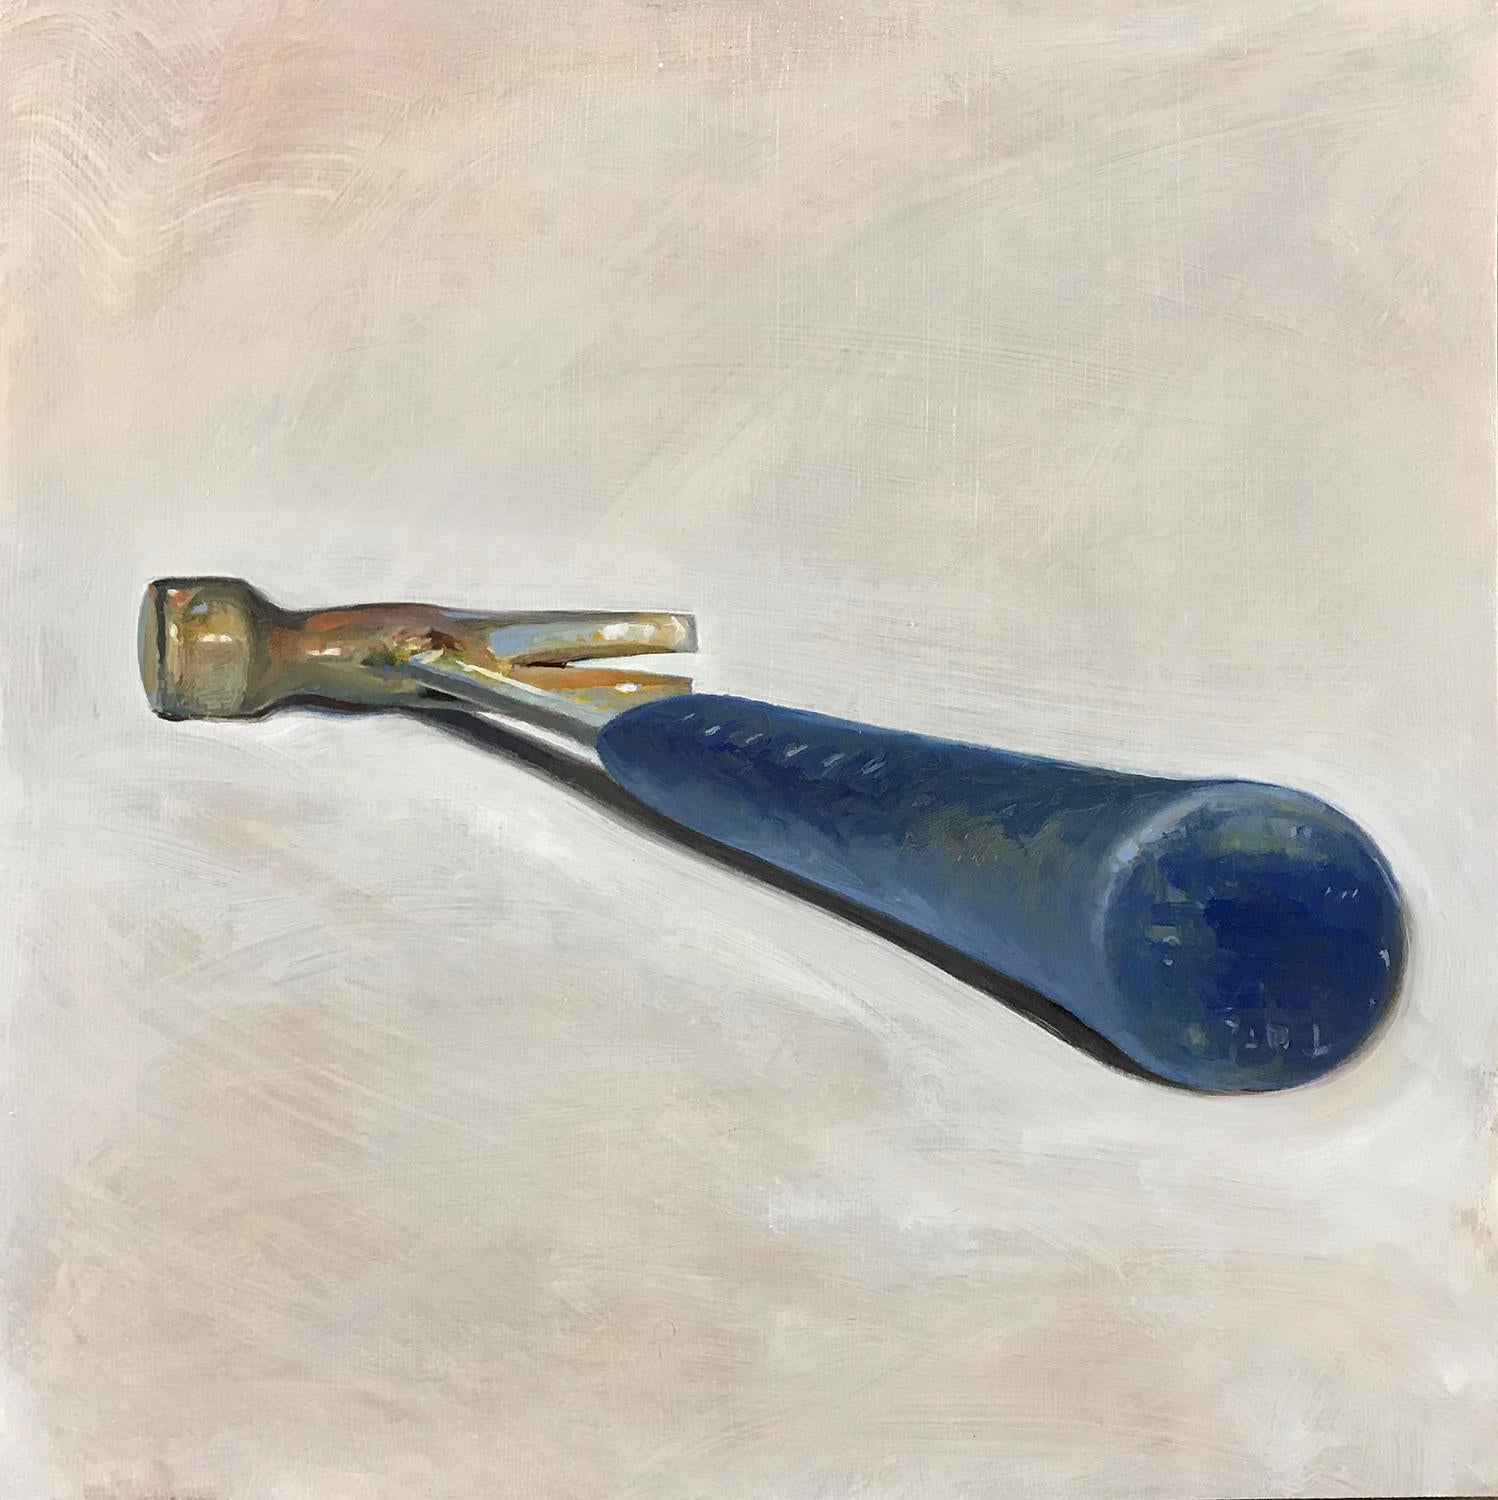 Hammer: Framed Realistic Still Life Oil Painting of Everyday Tool in Blue, Cream